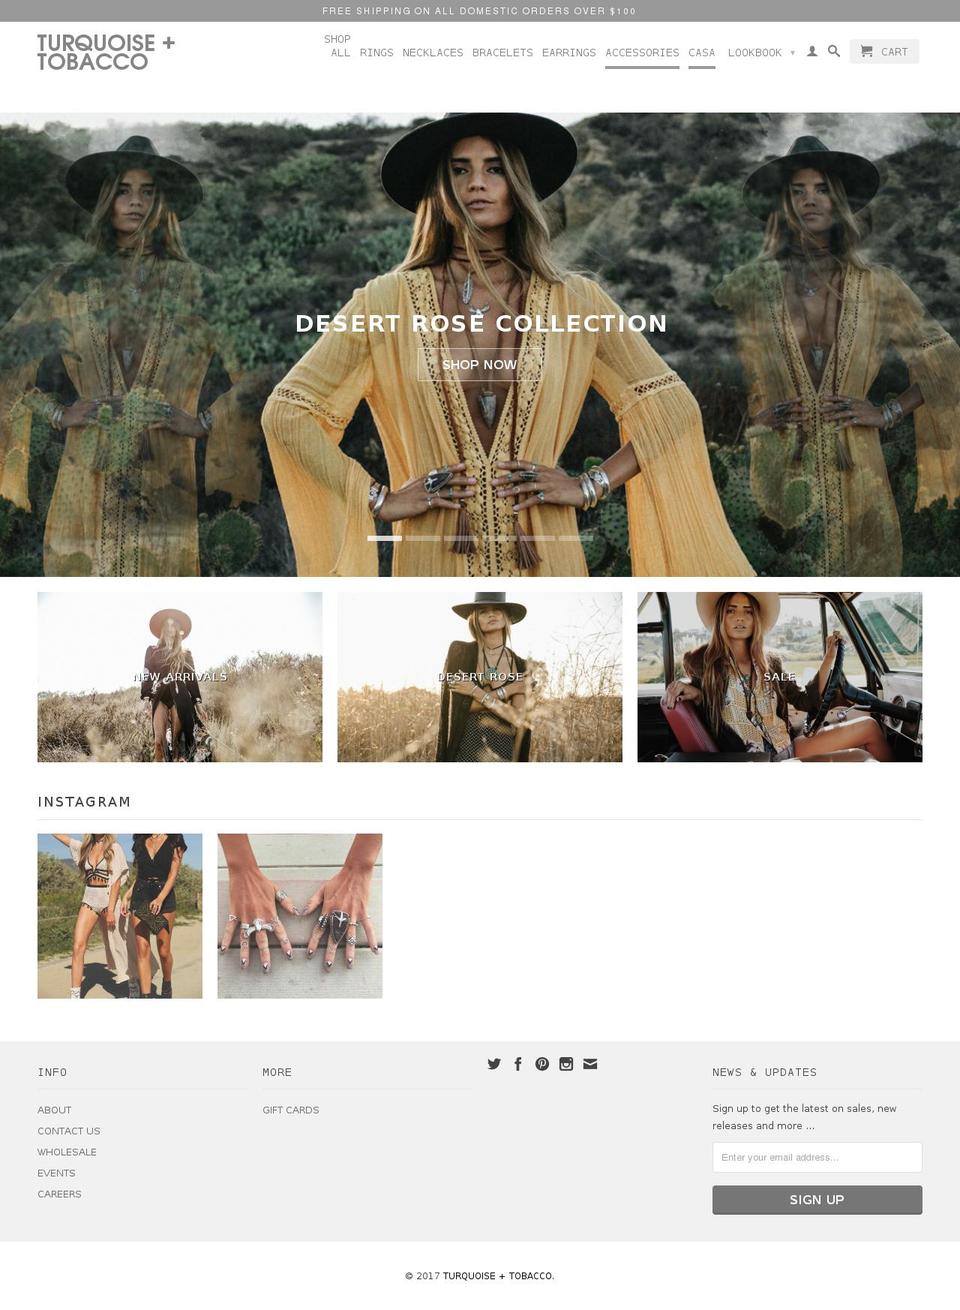 August Shopify theme site example turquoiseandtobacco.com